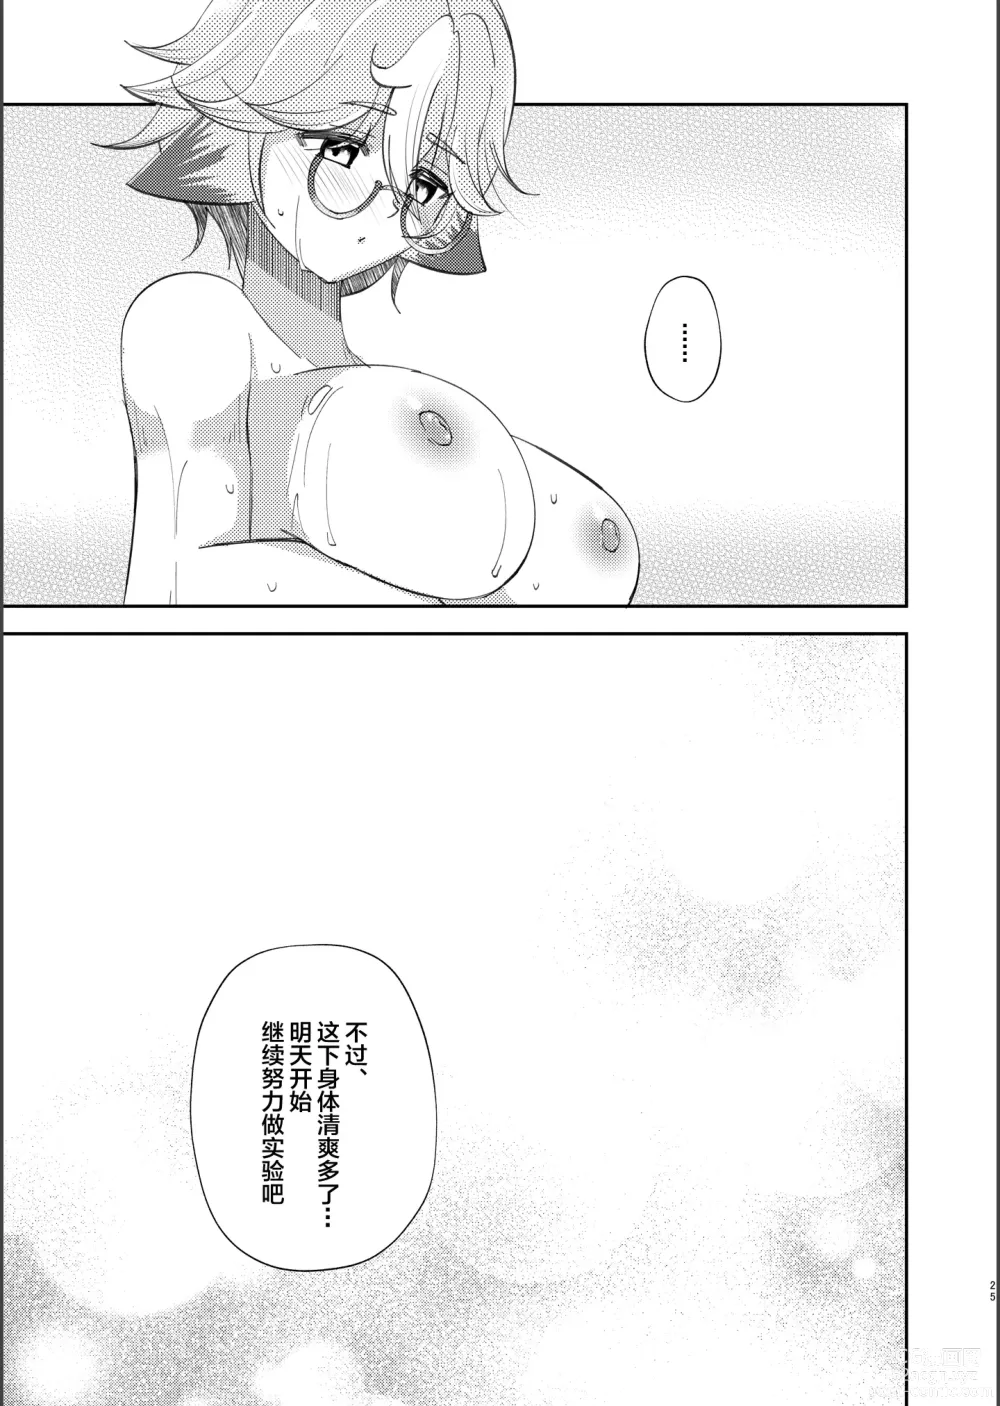 Page 23 of doujinshi repressed